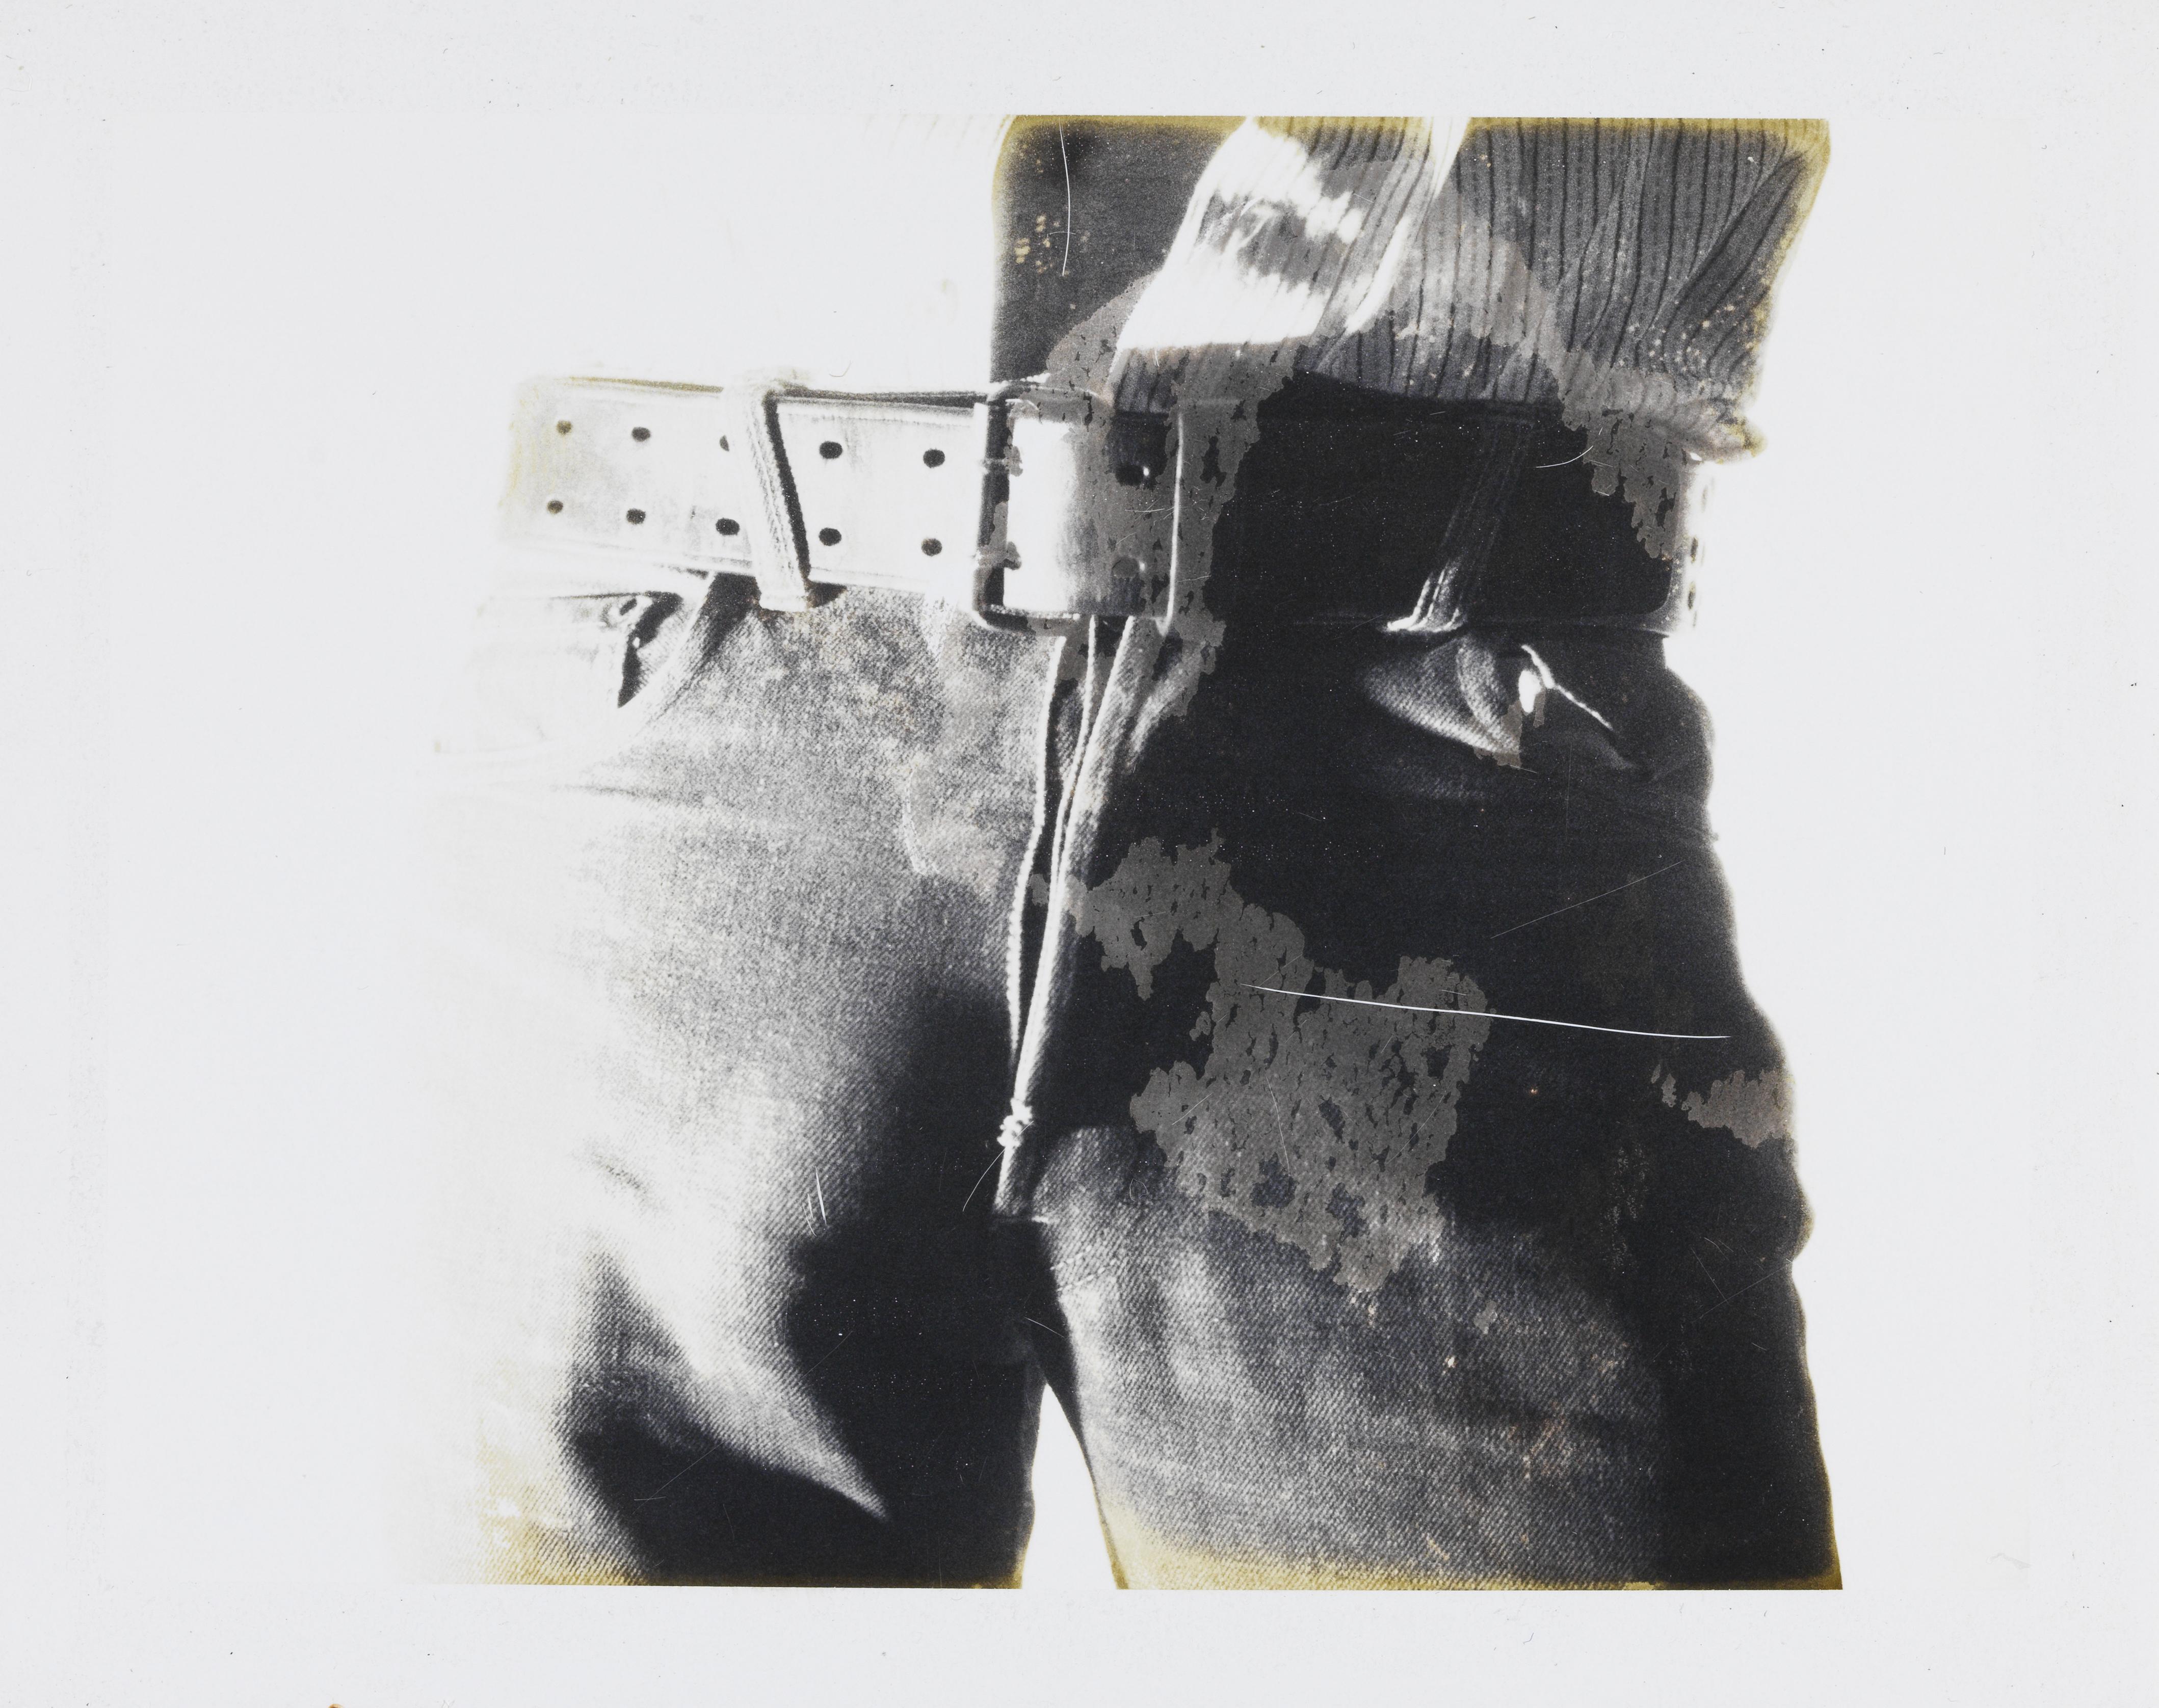 Andy Warhol Figurative Photograph - Study for Rolling Stone's 'Sticky Fingers' Album Cover - Polaroid